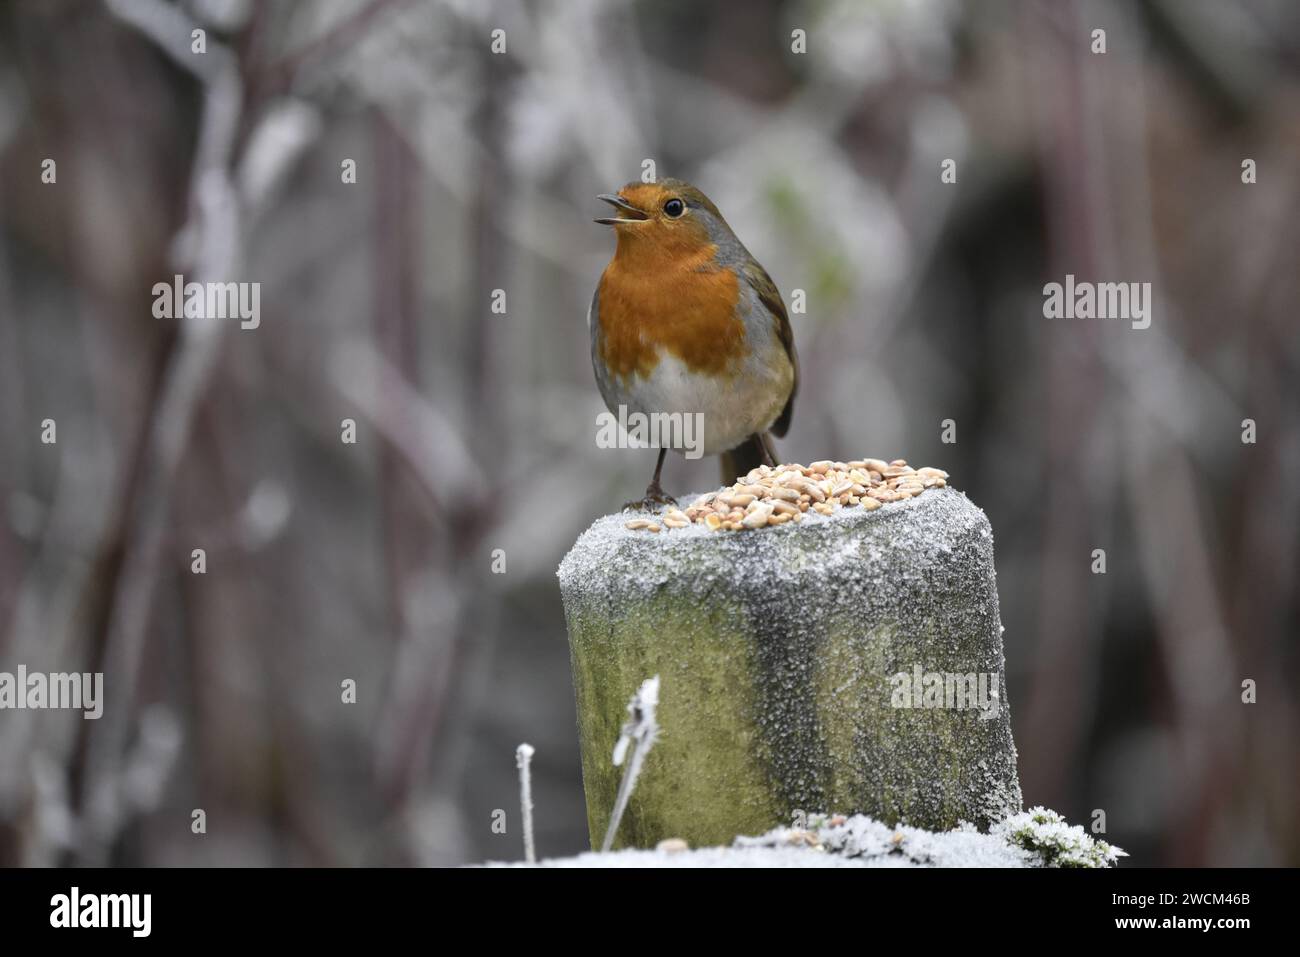 European Robin (Erithacus rubecula) Singing from Top of Wooden Post to Right of Image, Facing Camera, Looking to Left, taken in Winter in the UK Stock Photo